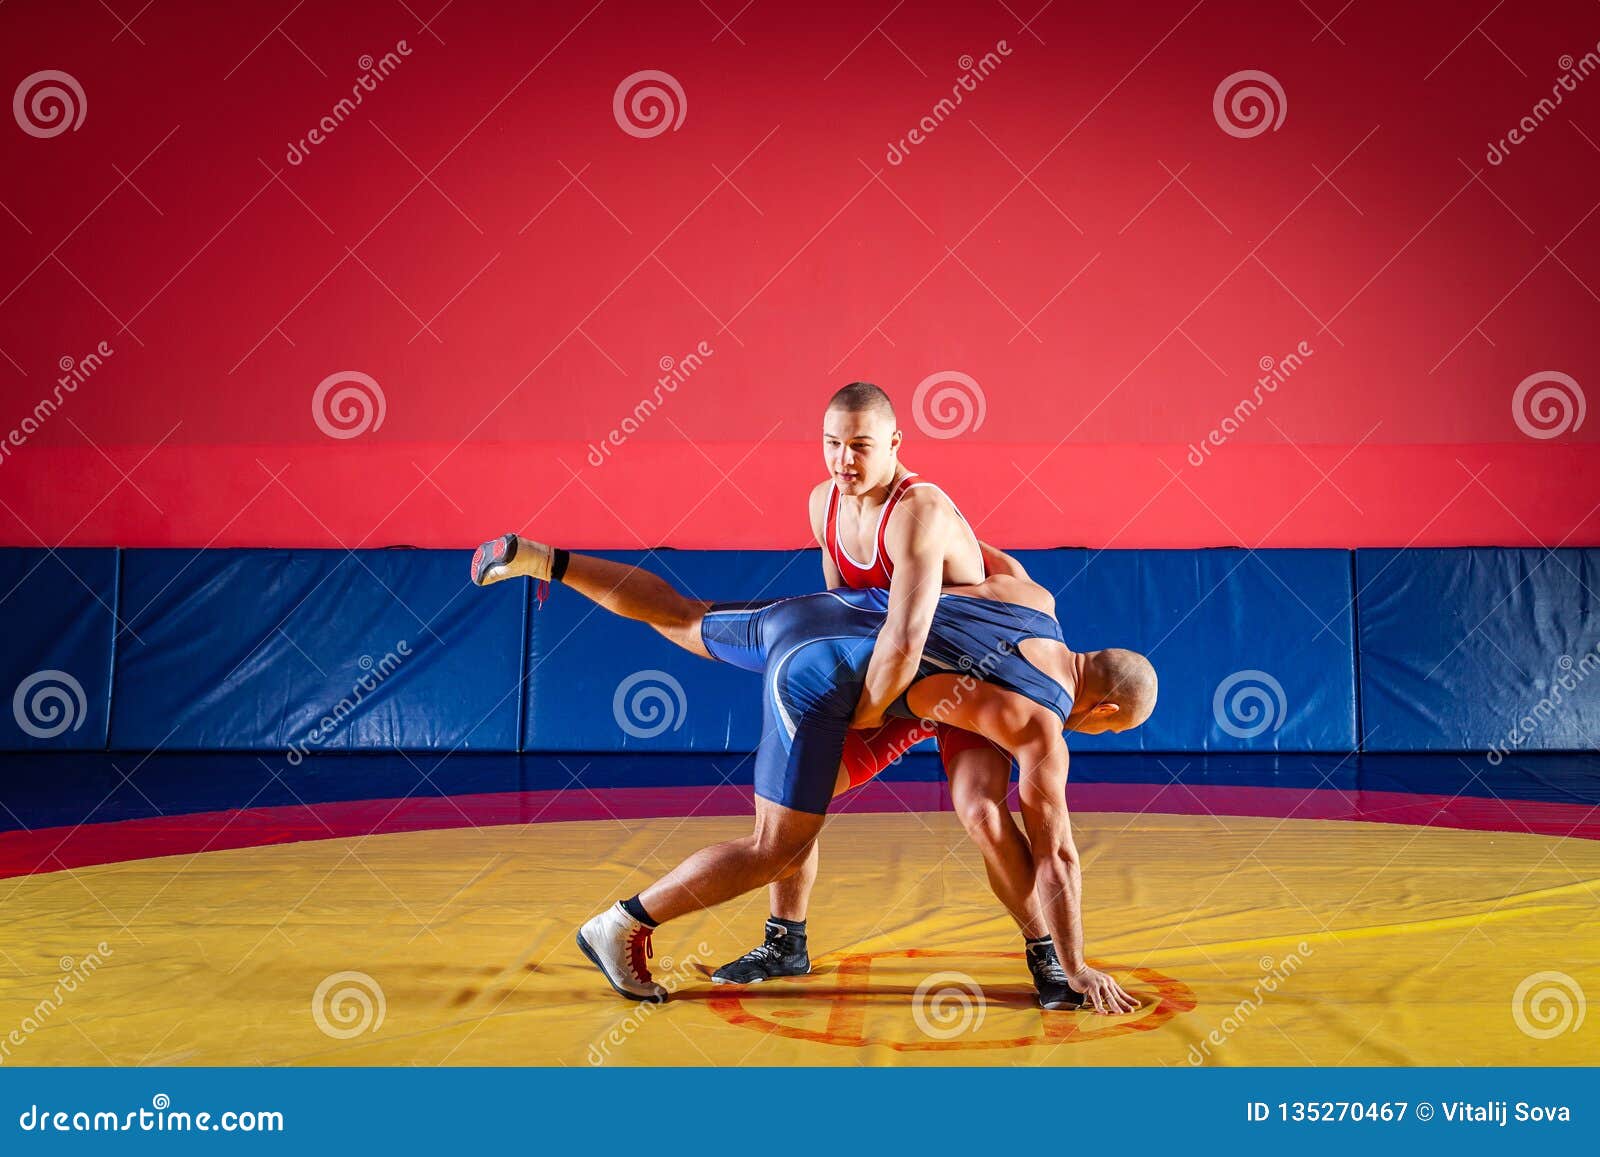 What is mixed wrestling